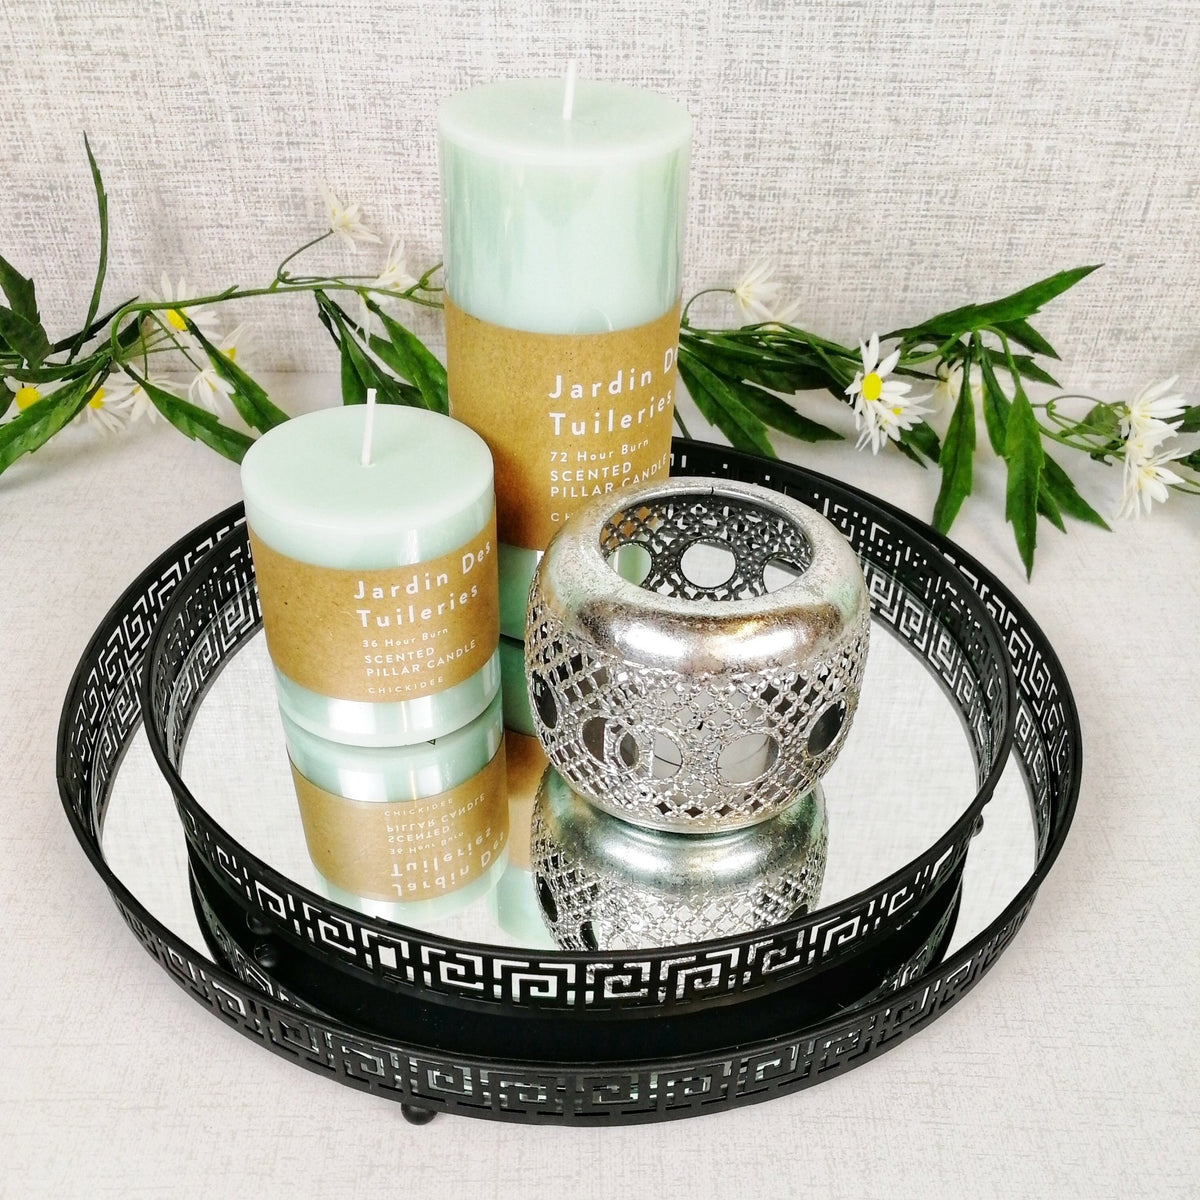 Black decorative circle mirror trays stacked with green scented pillar candles and a silver tea light holder